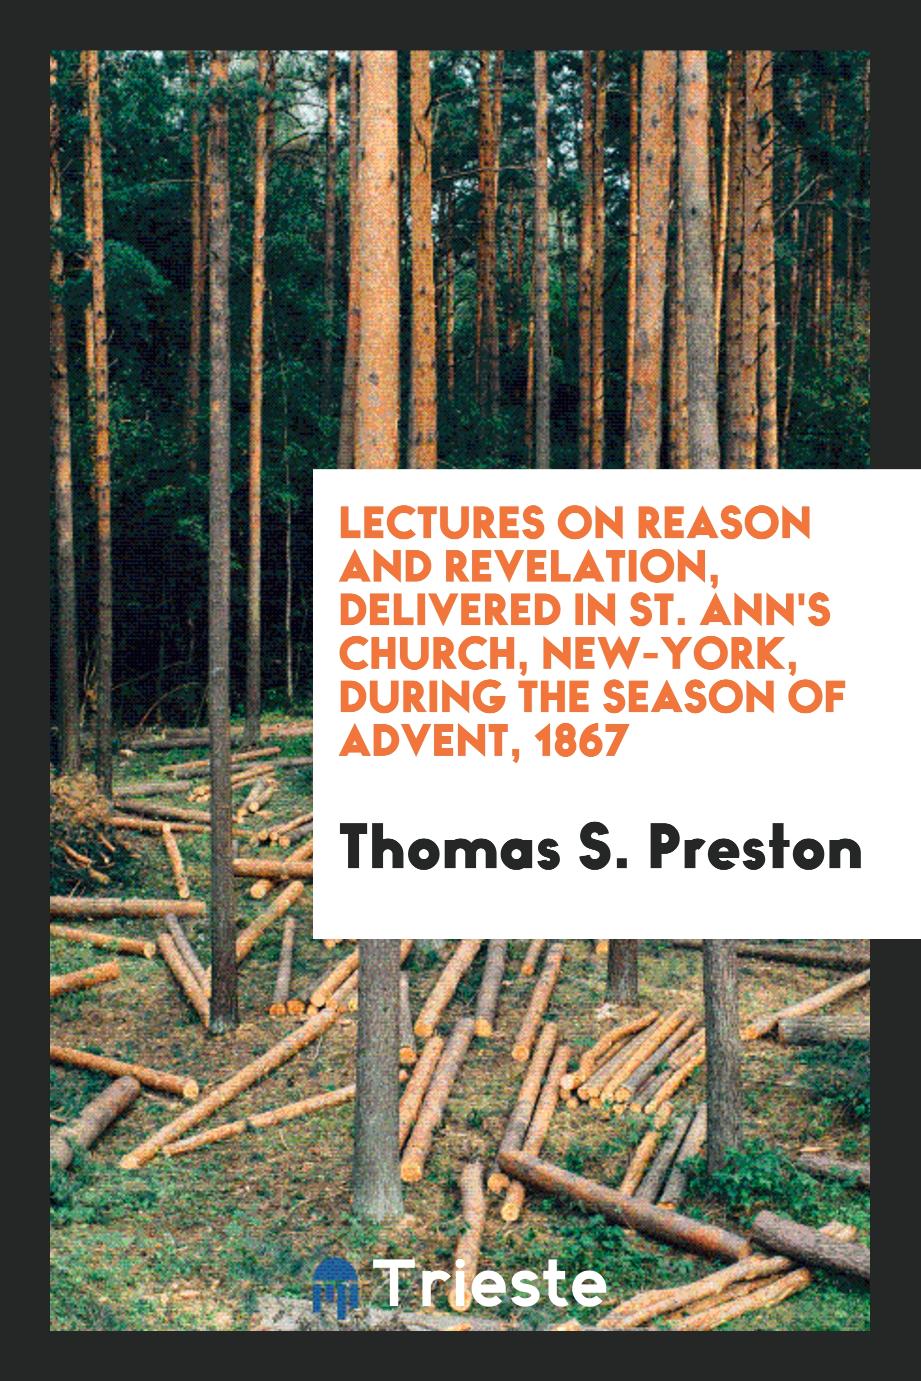 Lectures on reason and Revelation, delivered in St. Ann's Church, New-York, during the season of Advent, 1867